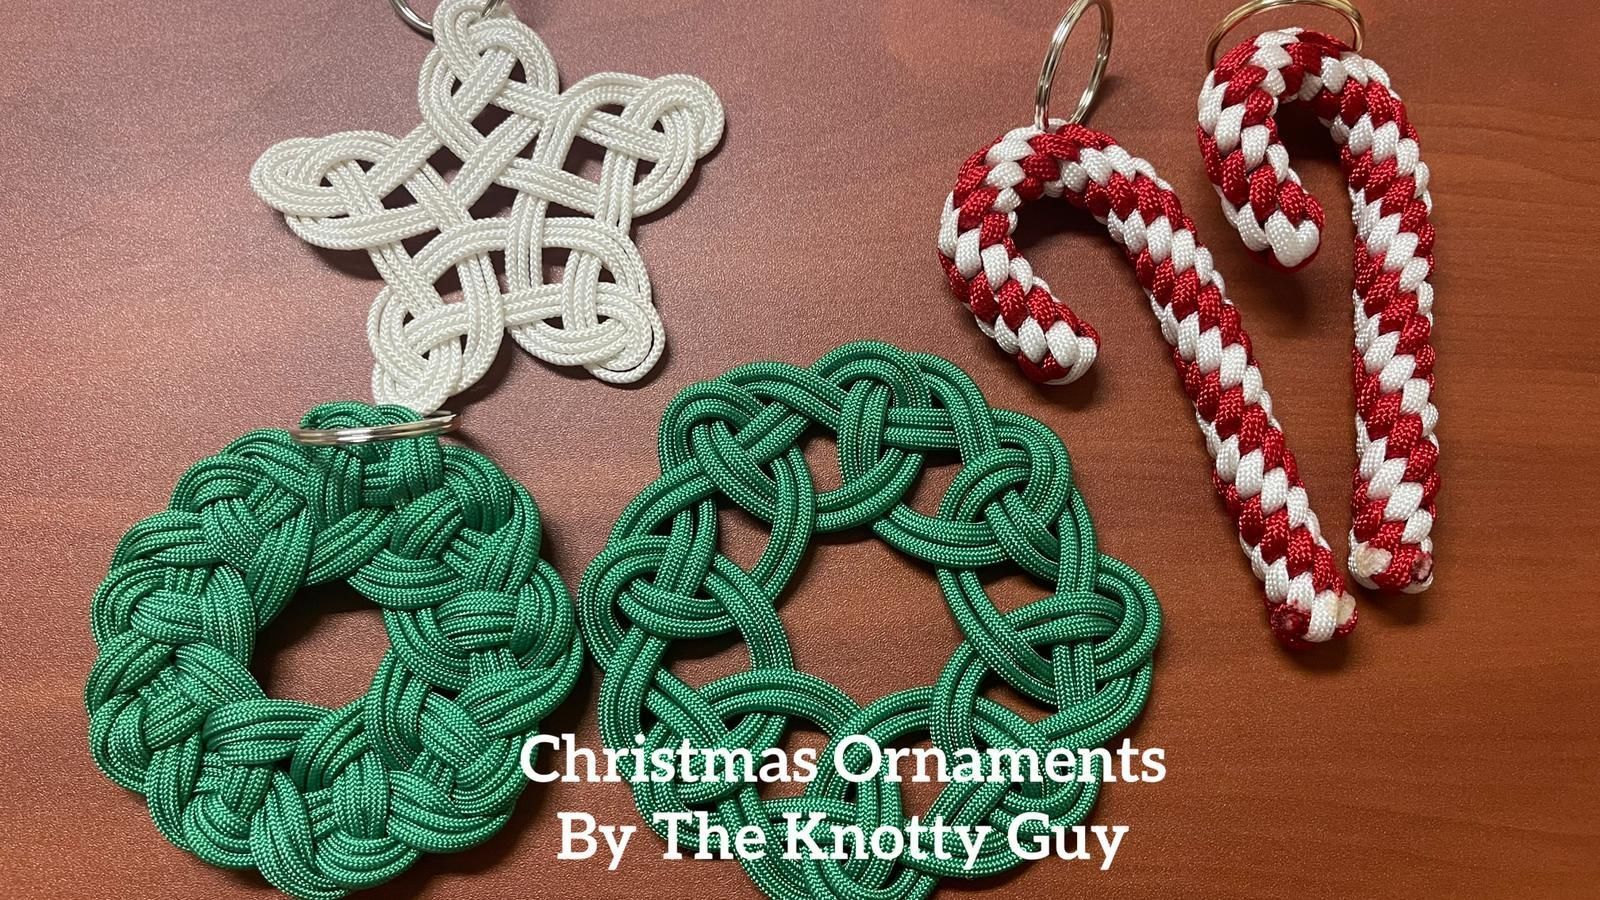 The Knotty Guy Facebook Page